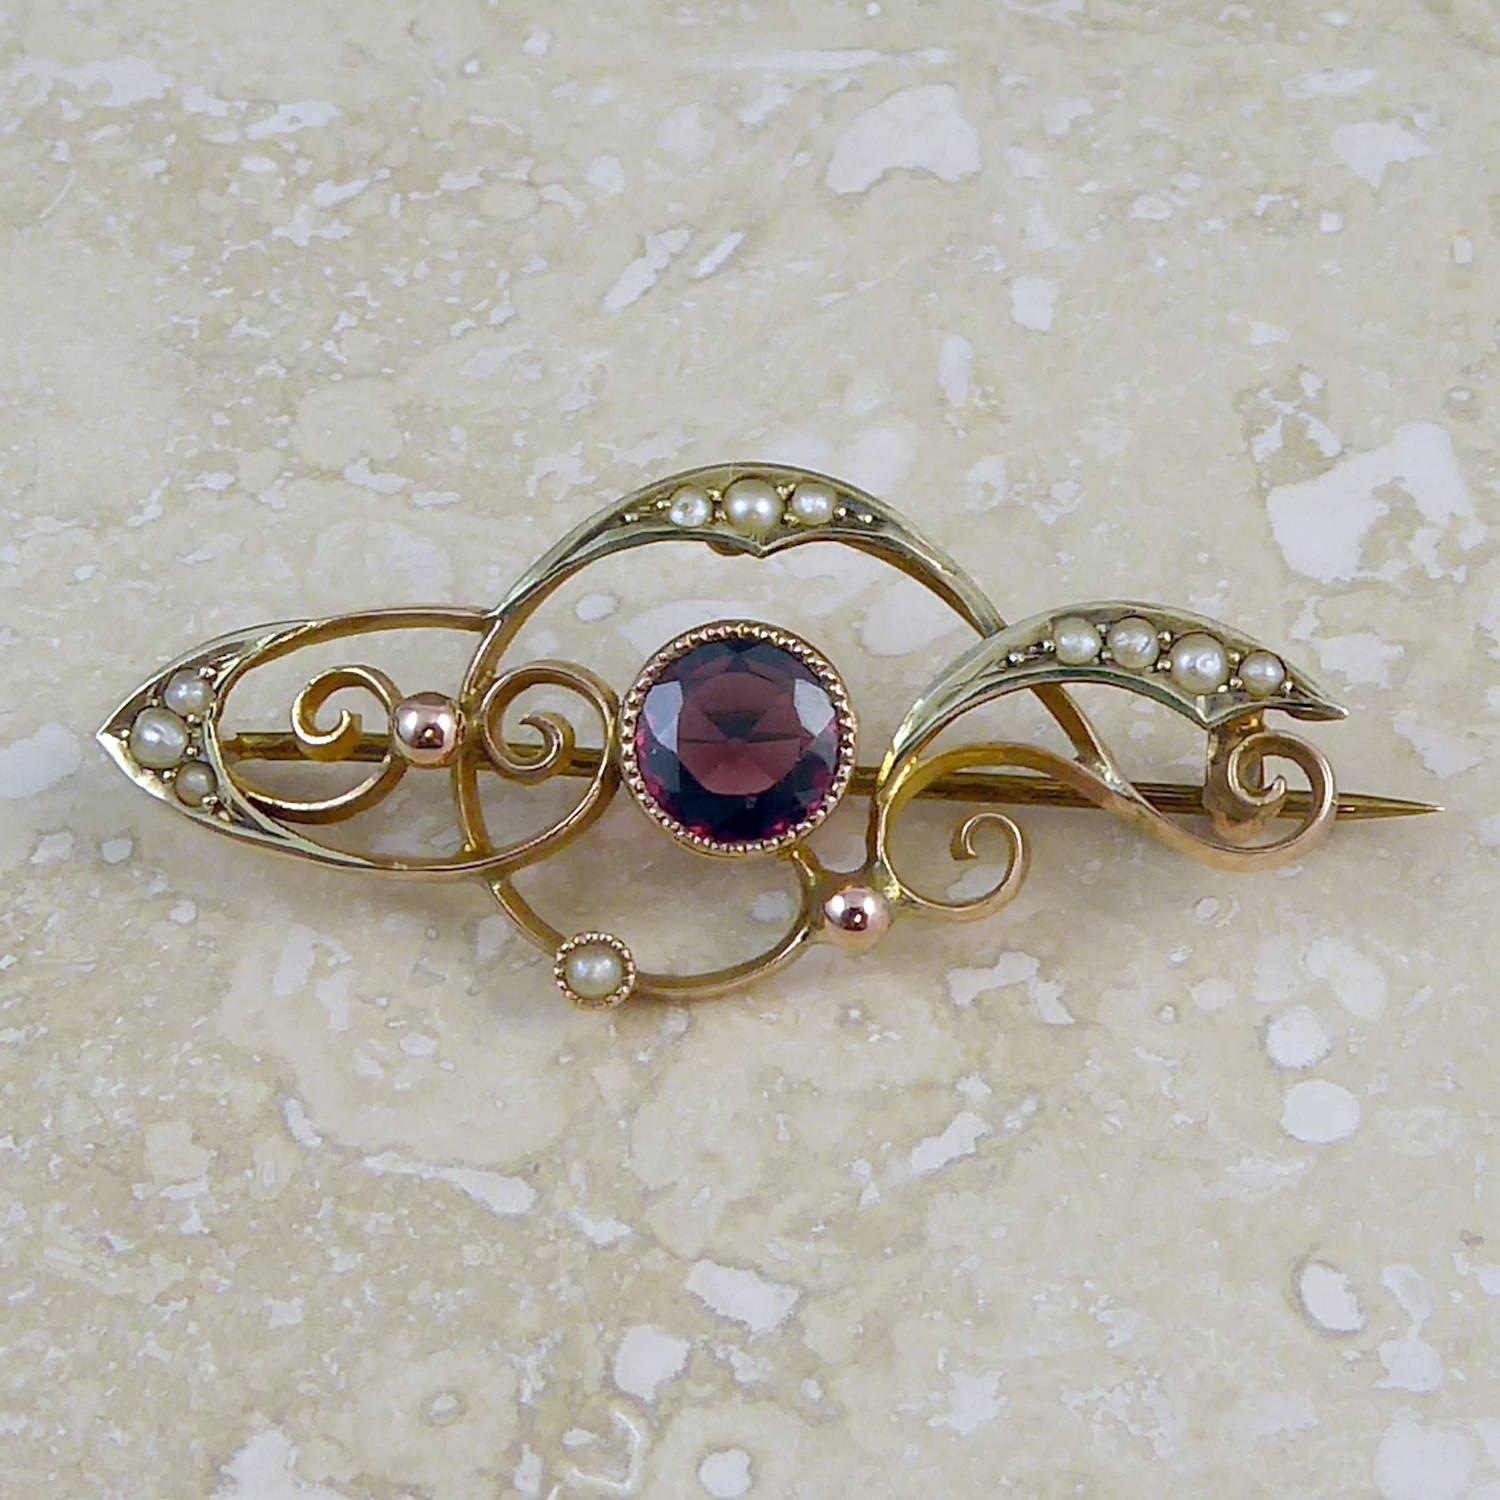 Antique Art Nouveau Gold Pin, Garnet and Seed Pearls, Rose and Yellow Gold 1